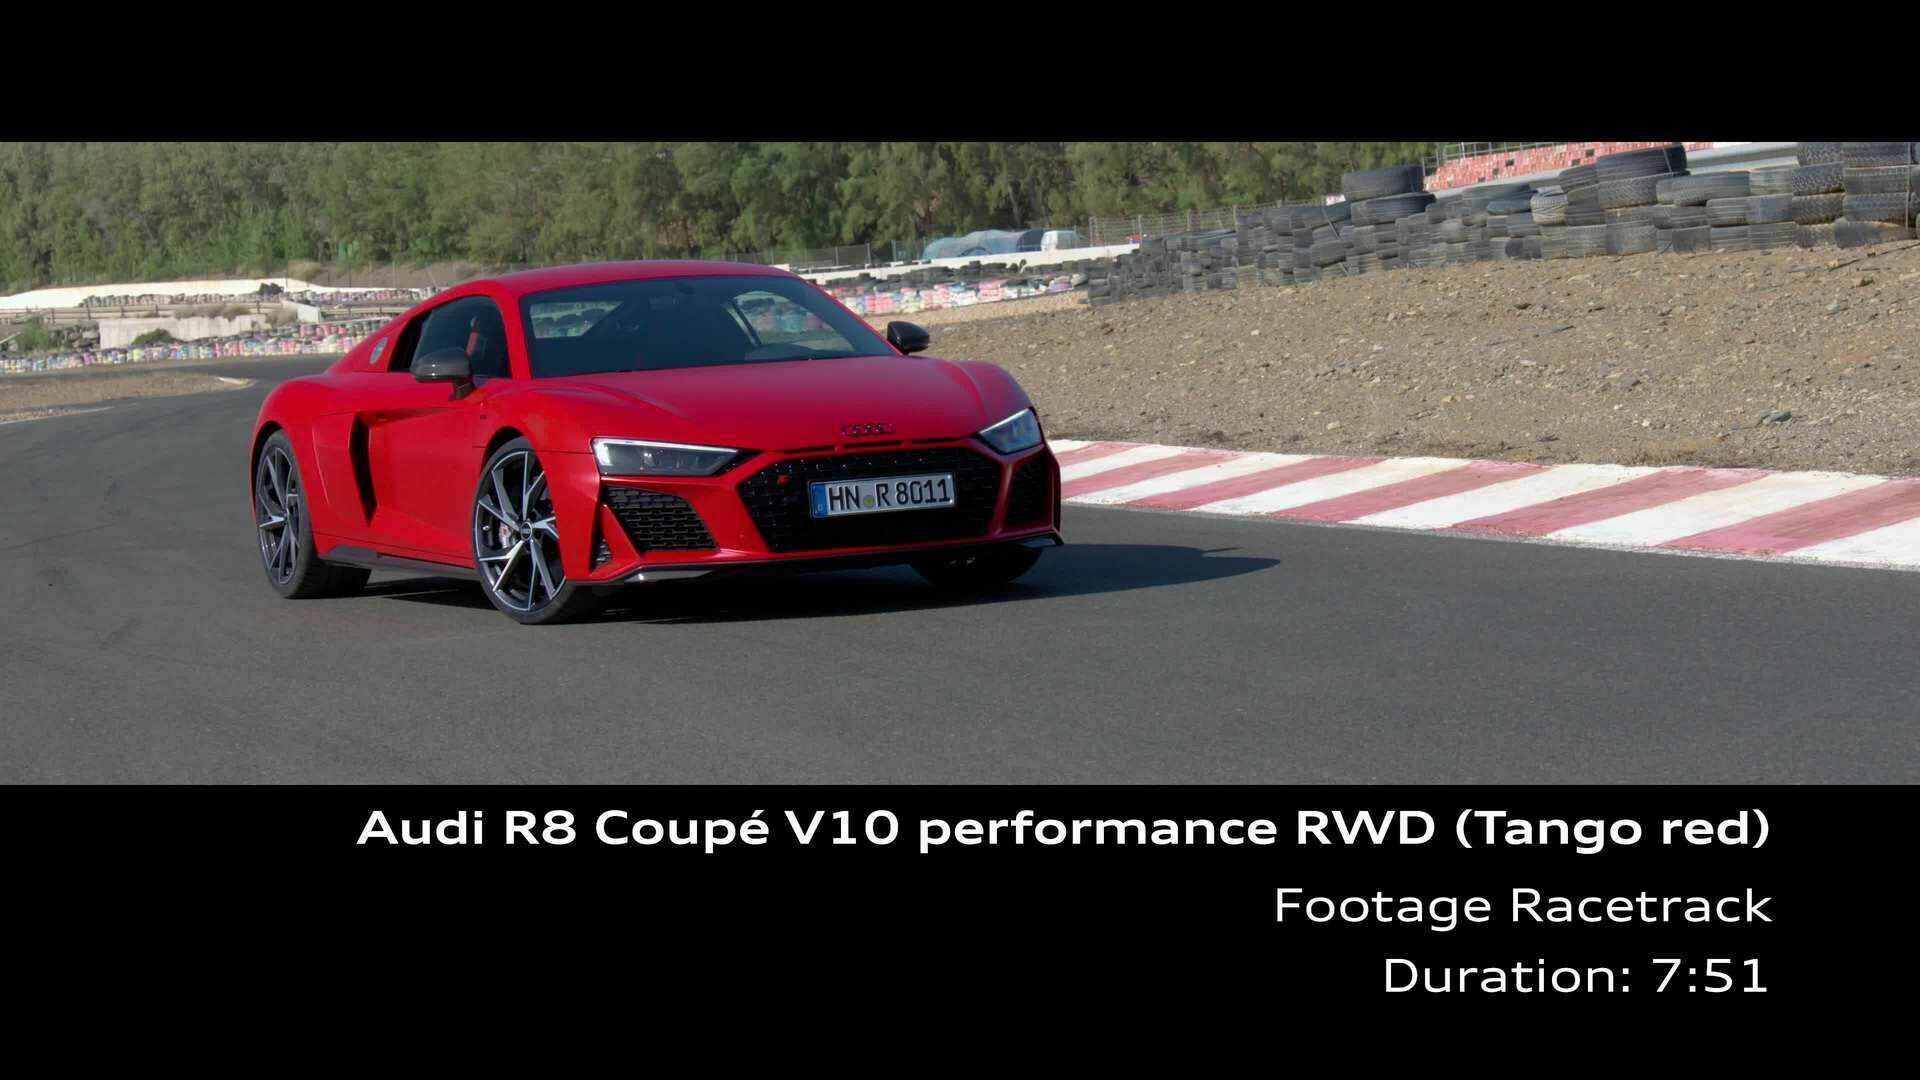 Footage: Audi R8 Coupé V10 performance in tango red 